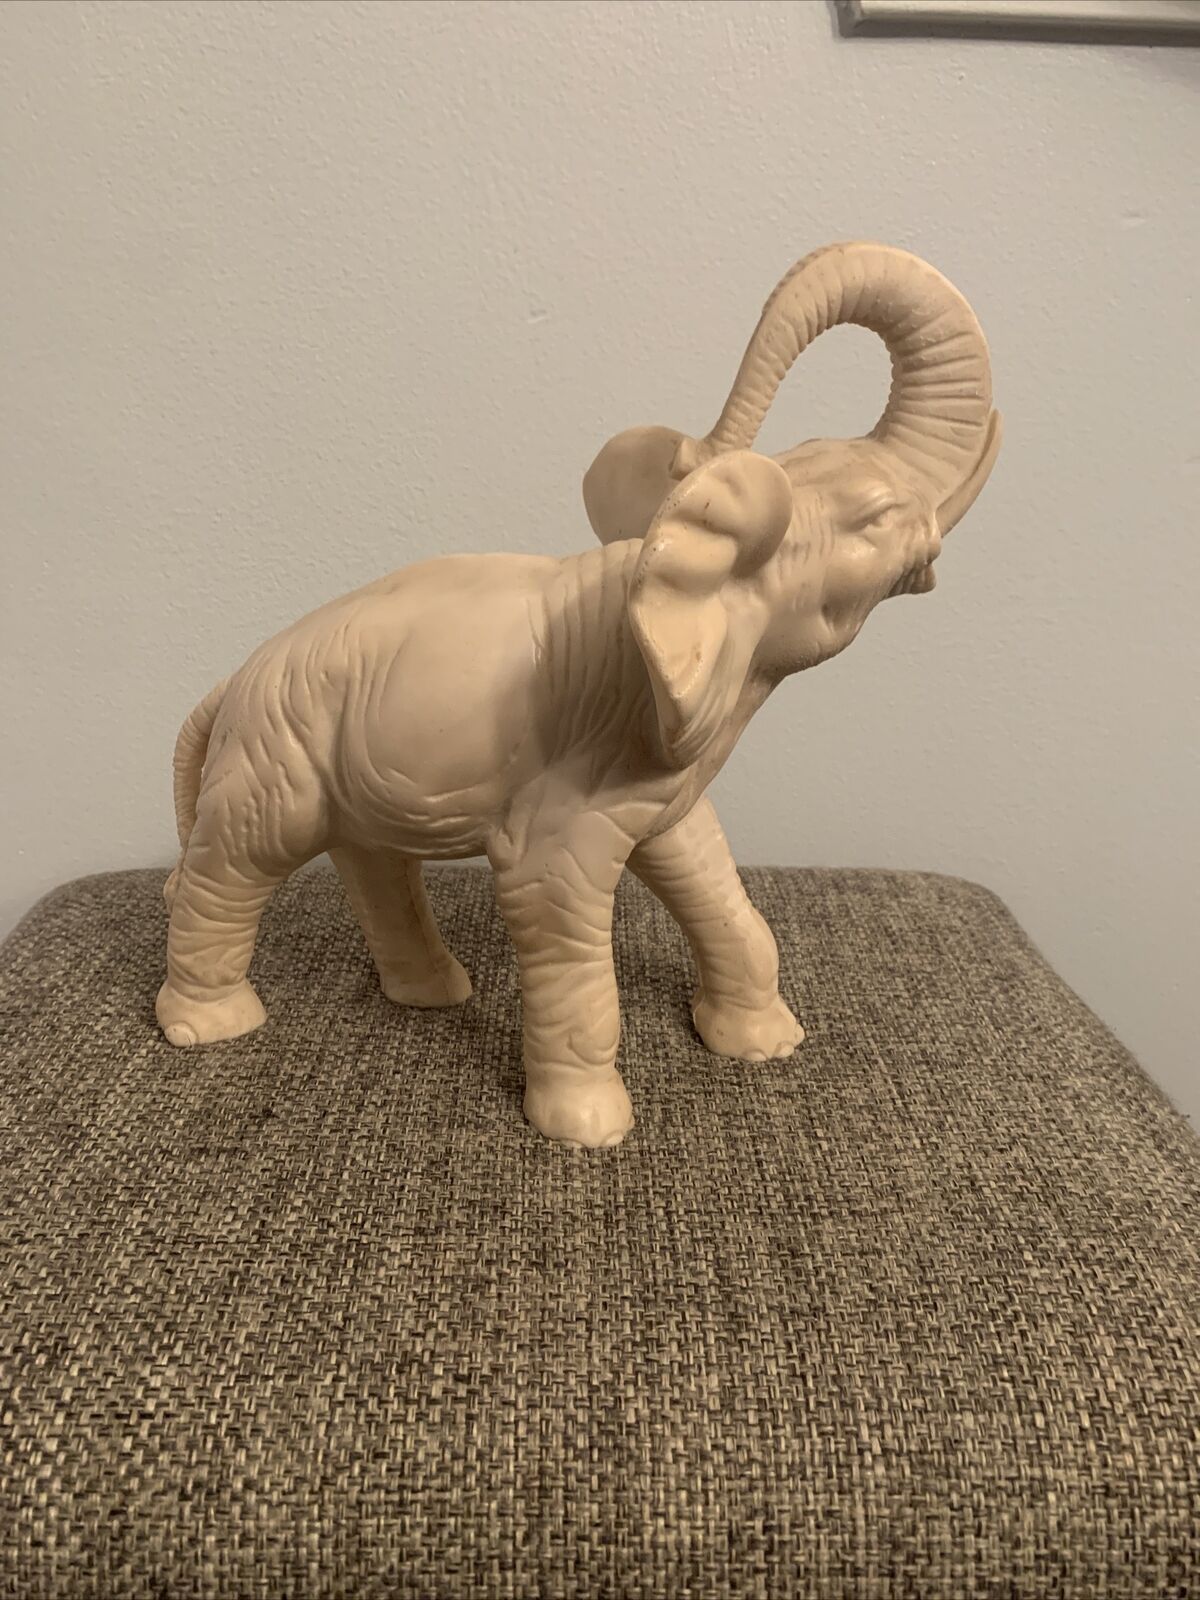 Rare Vintage Elephant Figurine “Bone-Like” Material Made In Italy Antique